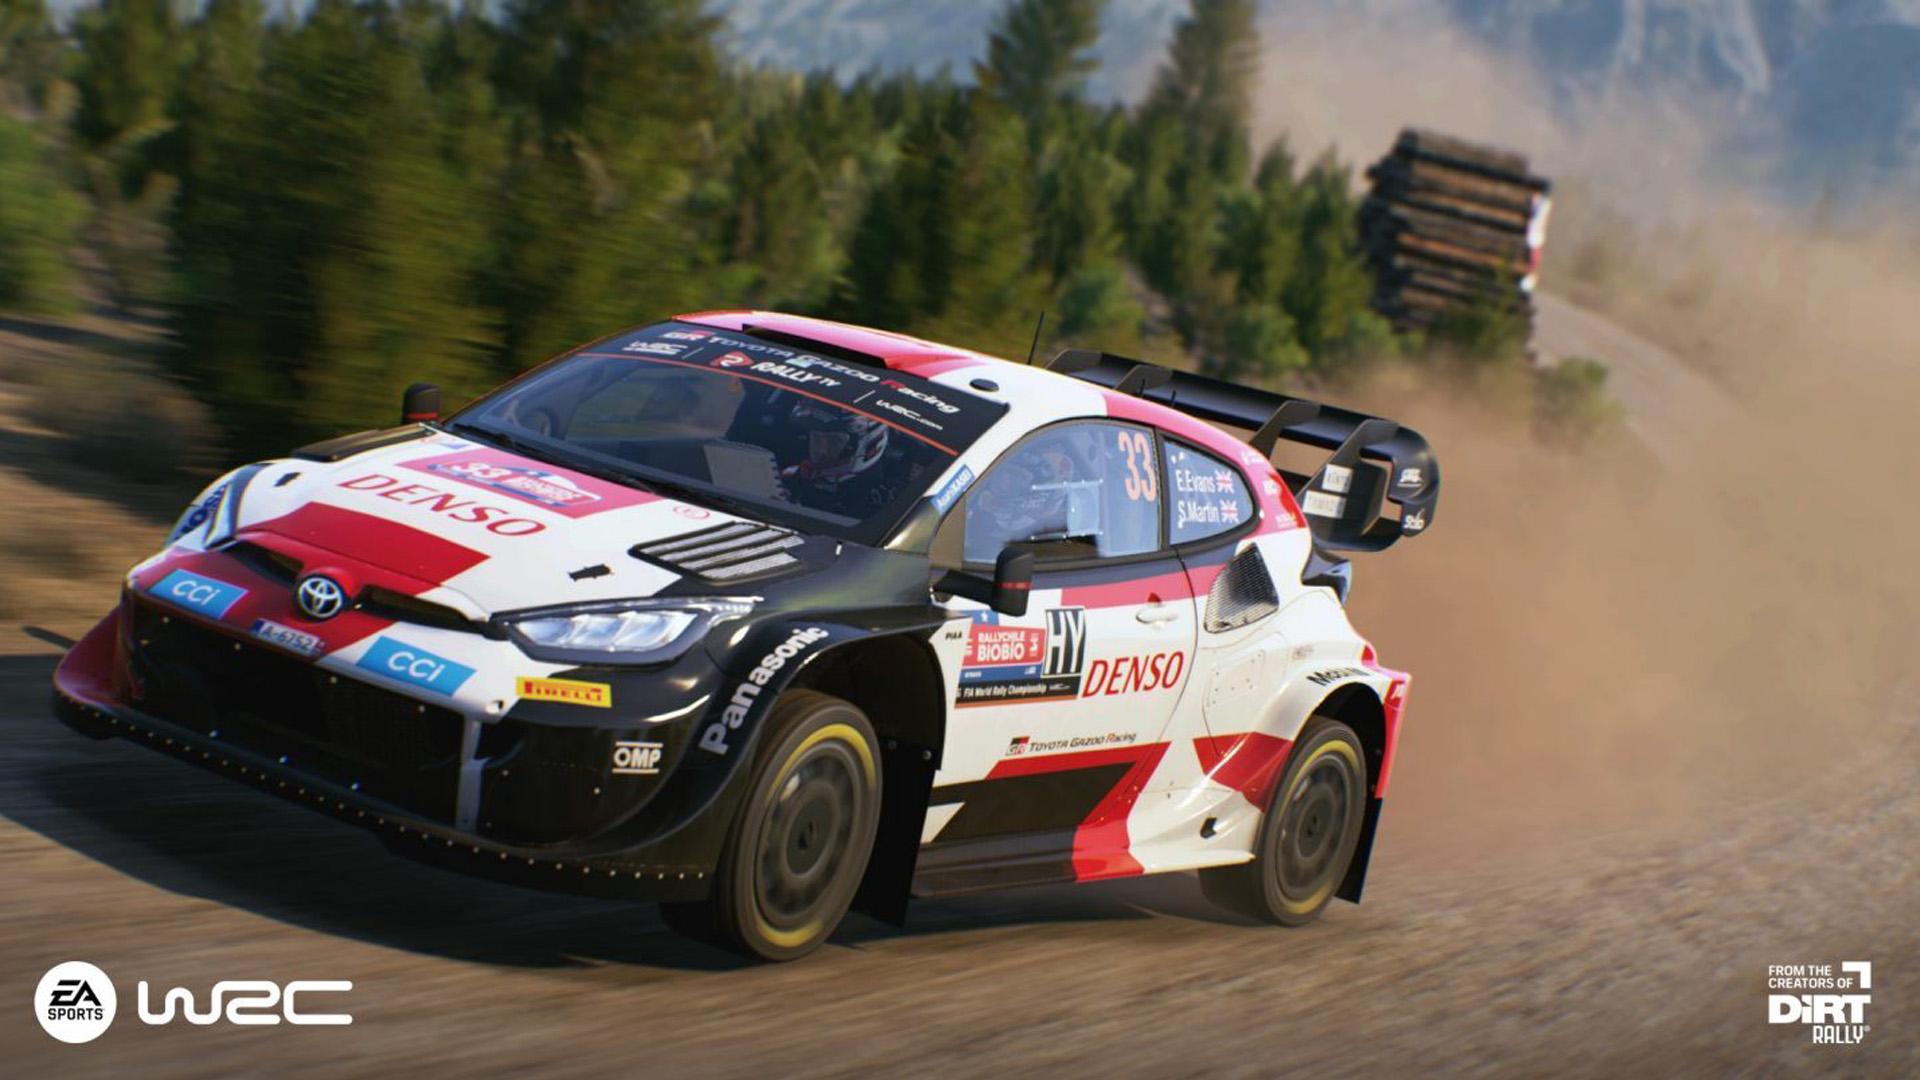 EA Sports WRC Preorders Are 40% Off At  For PS5 And Xbox - GameSpot